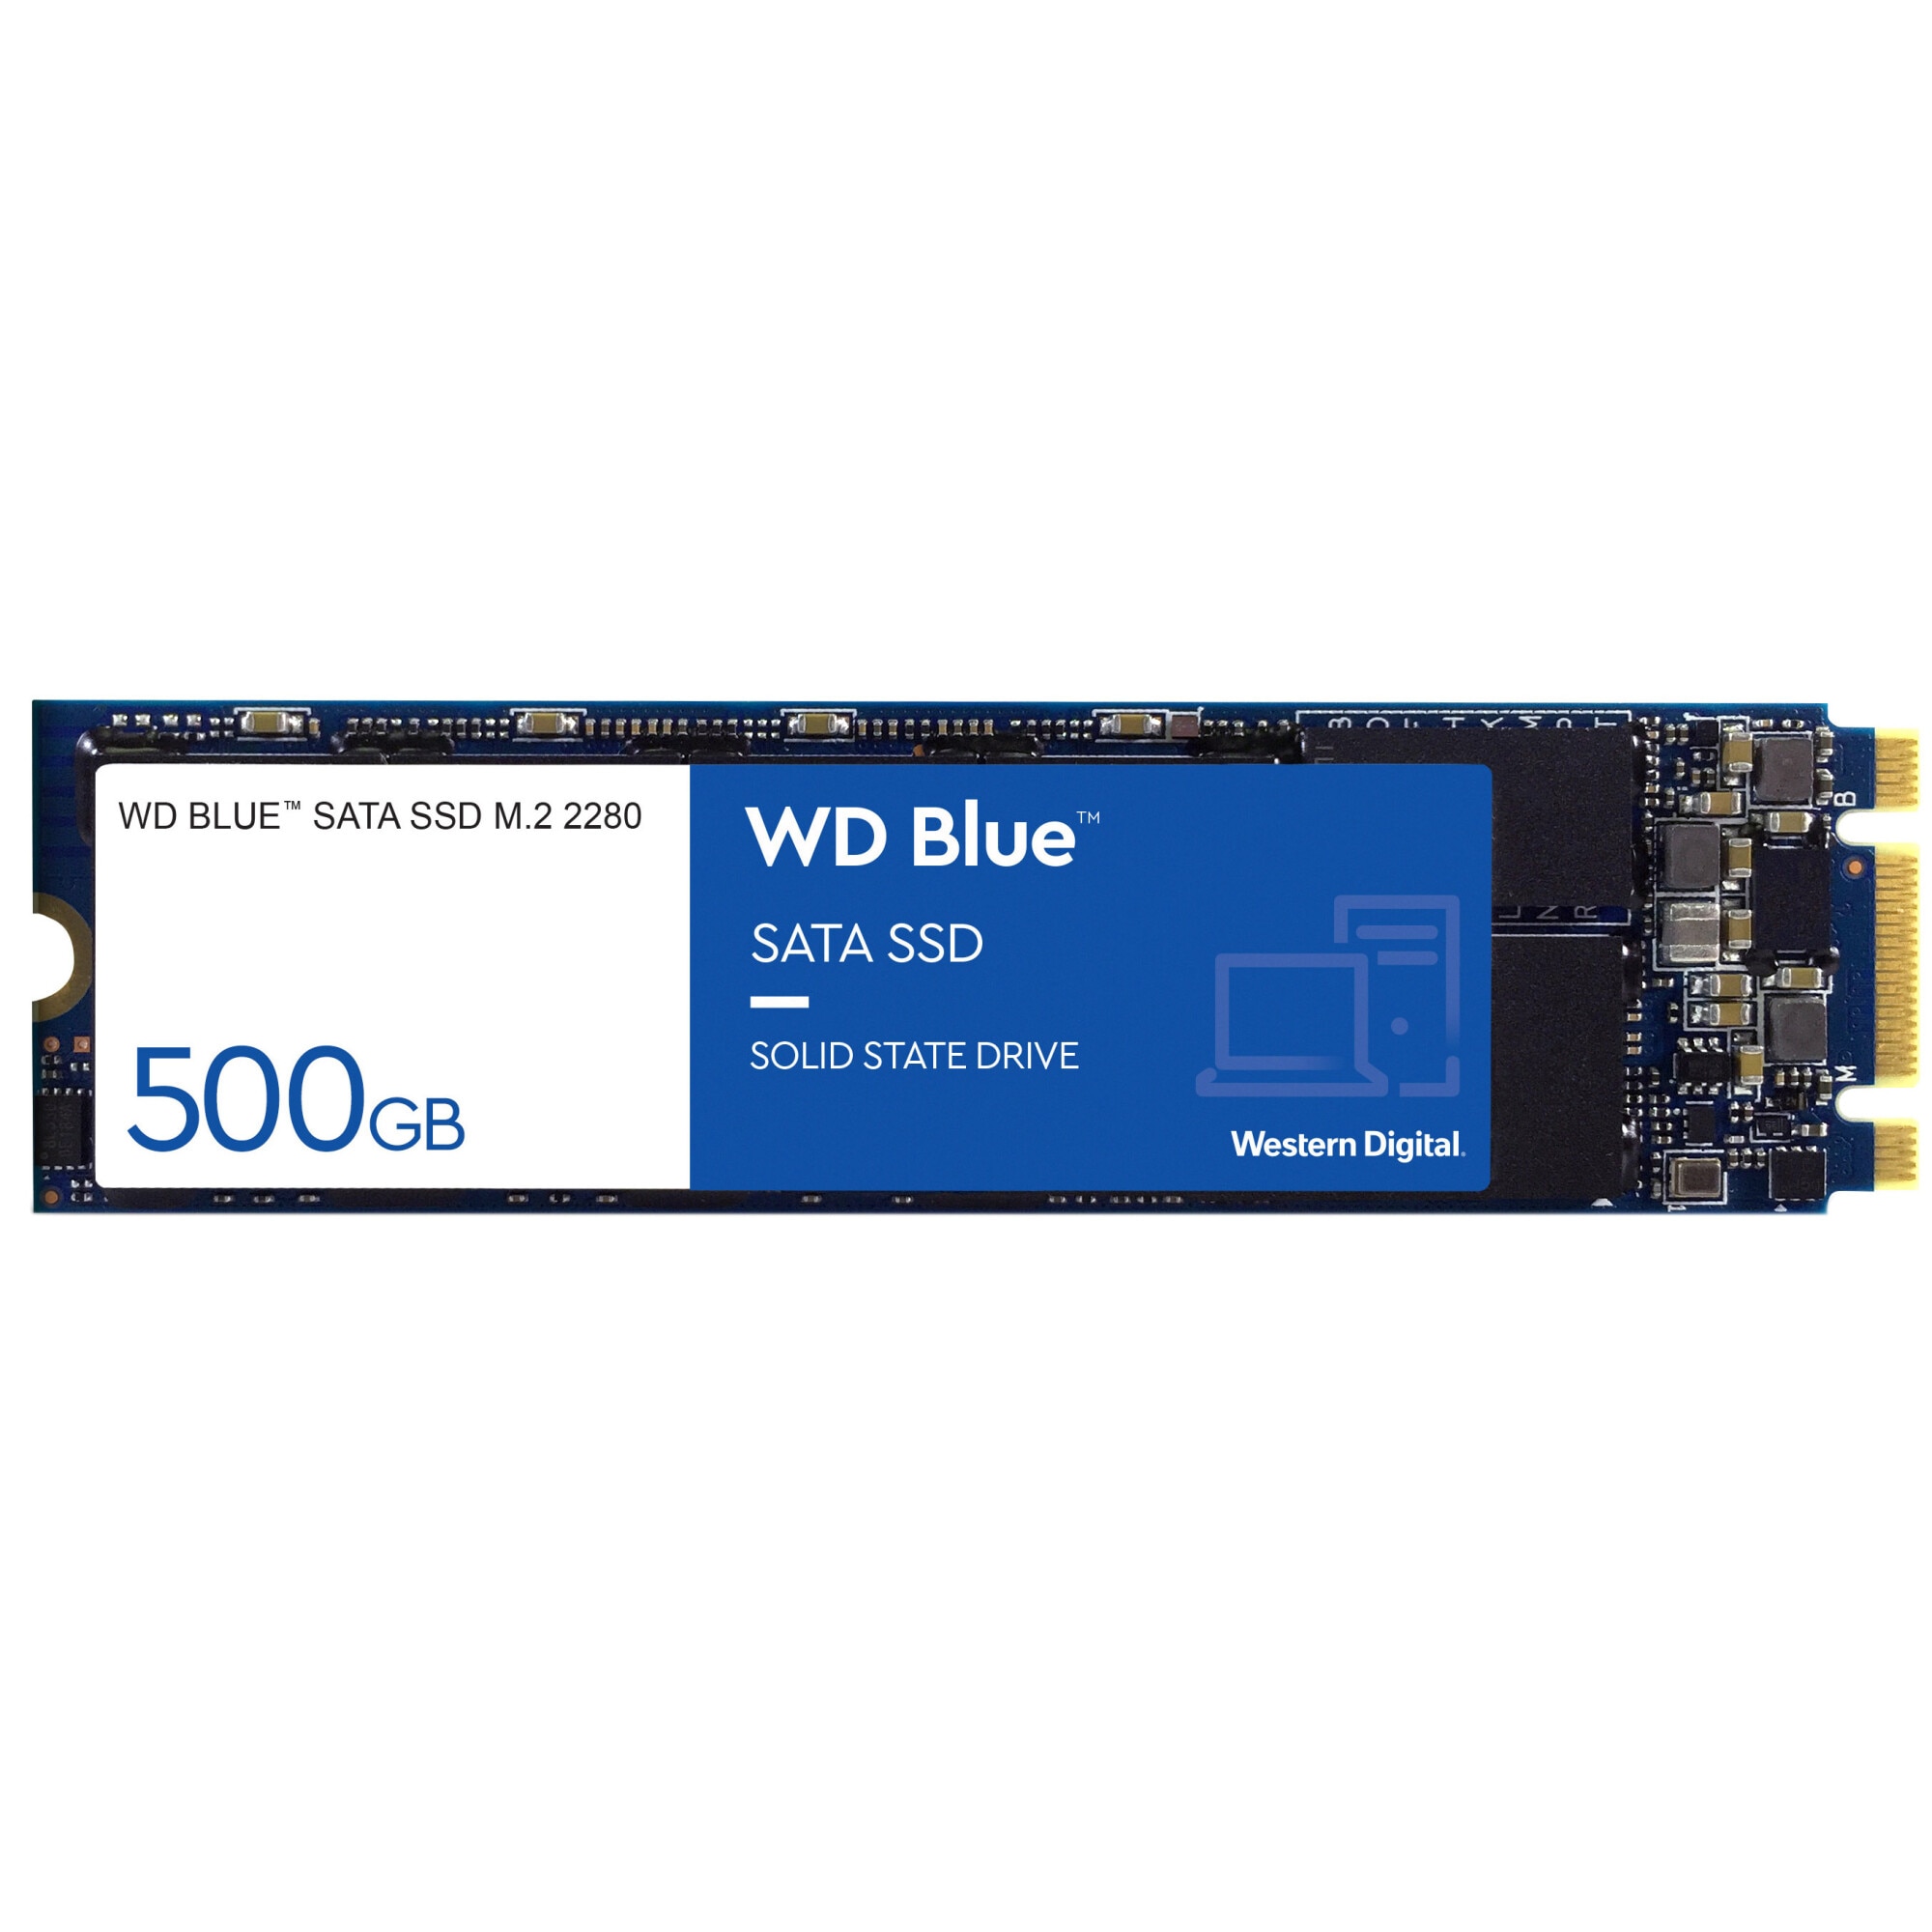 Shackle emulsion segment Solid State Drive (SSD) WD Blue™, 500GB, SATA III, M.2 2280 - eMAG.ro